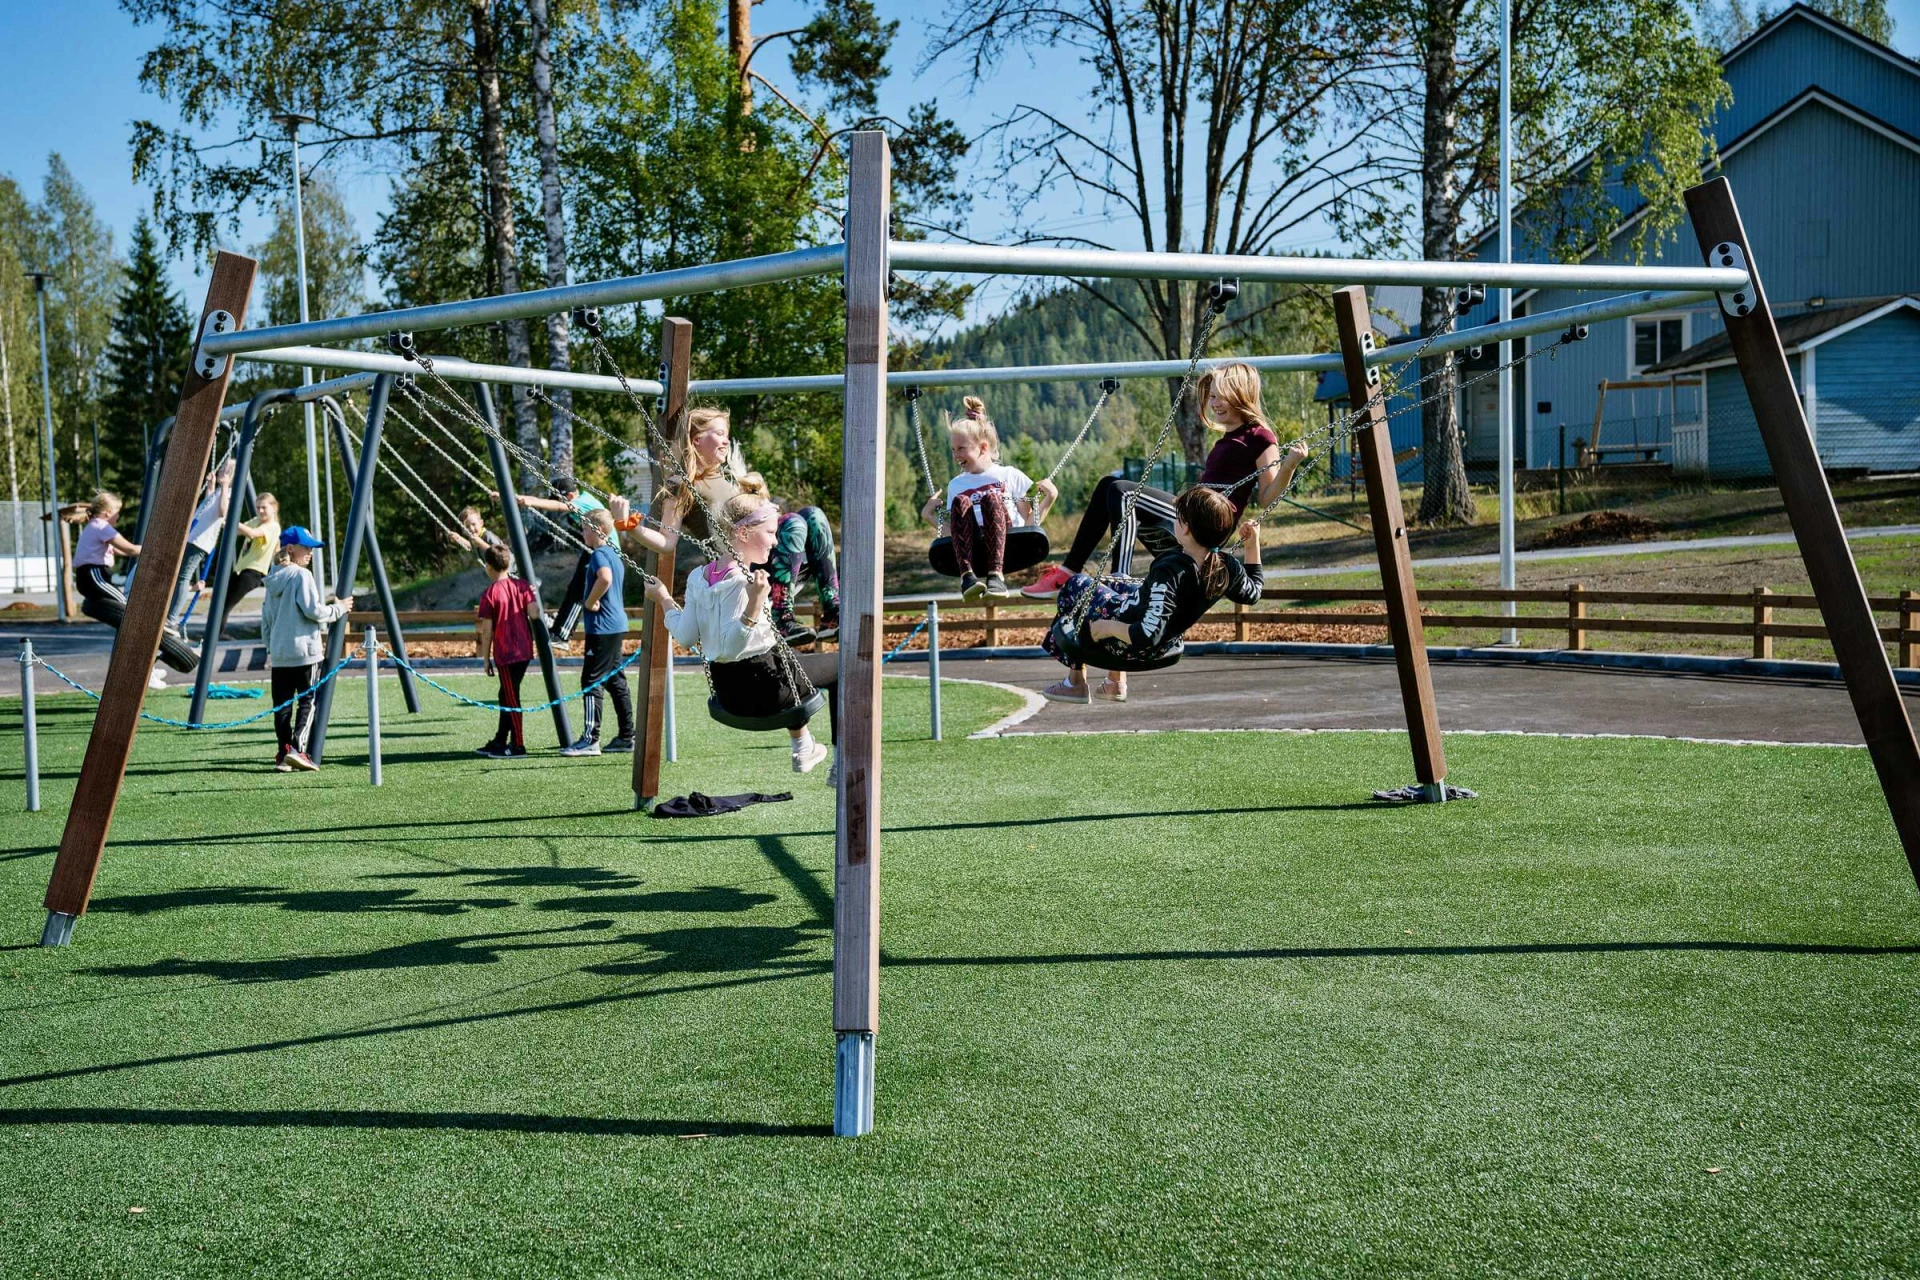 School playground with children swinging on a five way swing